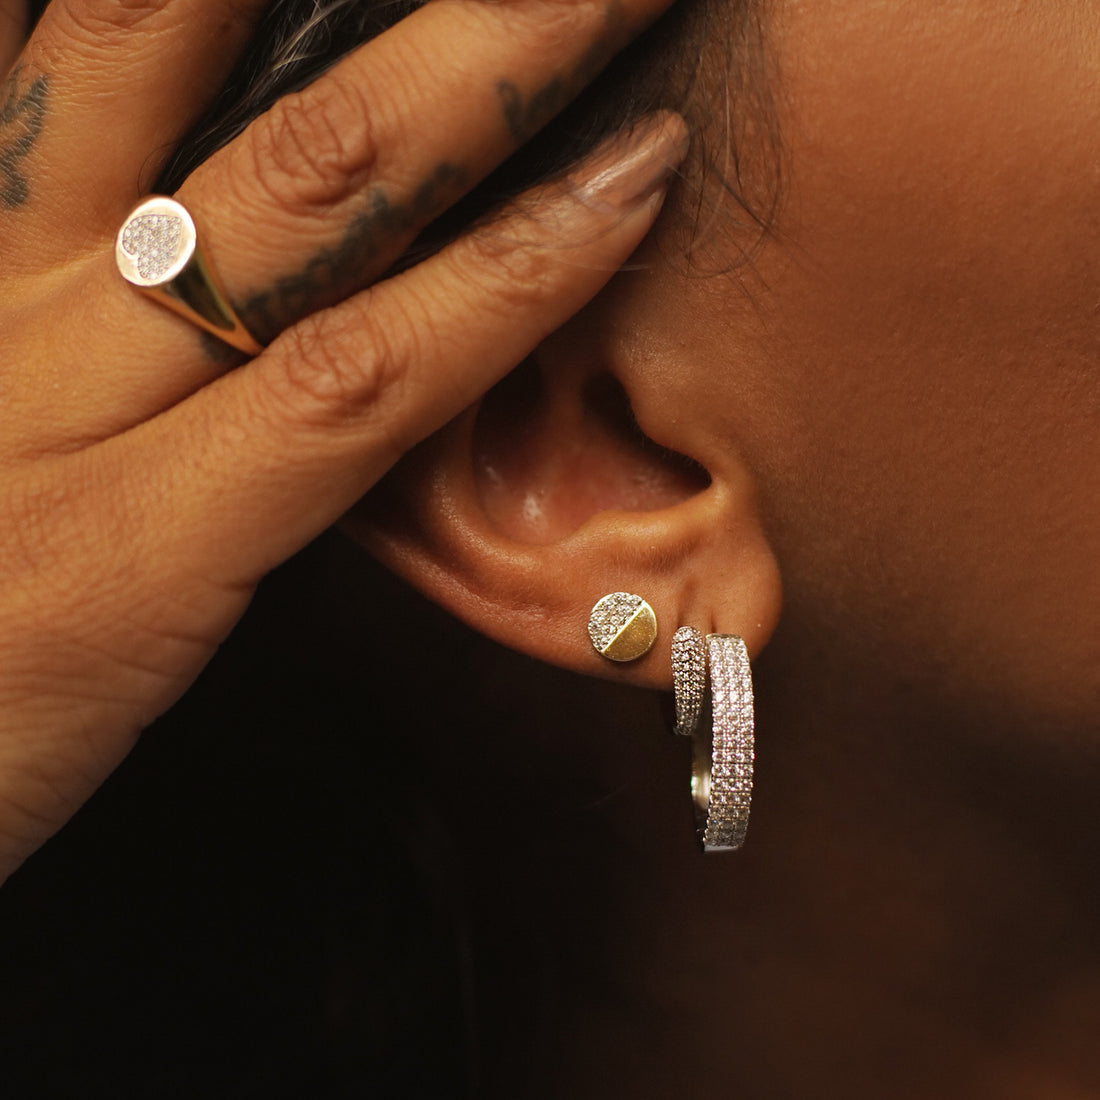 How to Find the Right Earrings: Studs, Hoops, Dangle